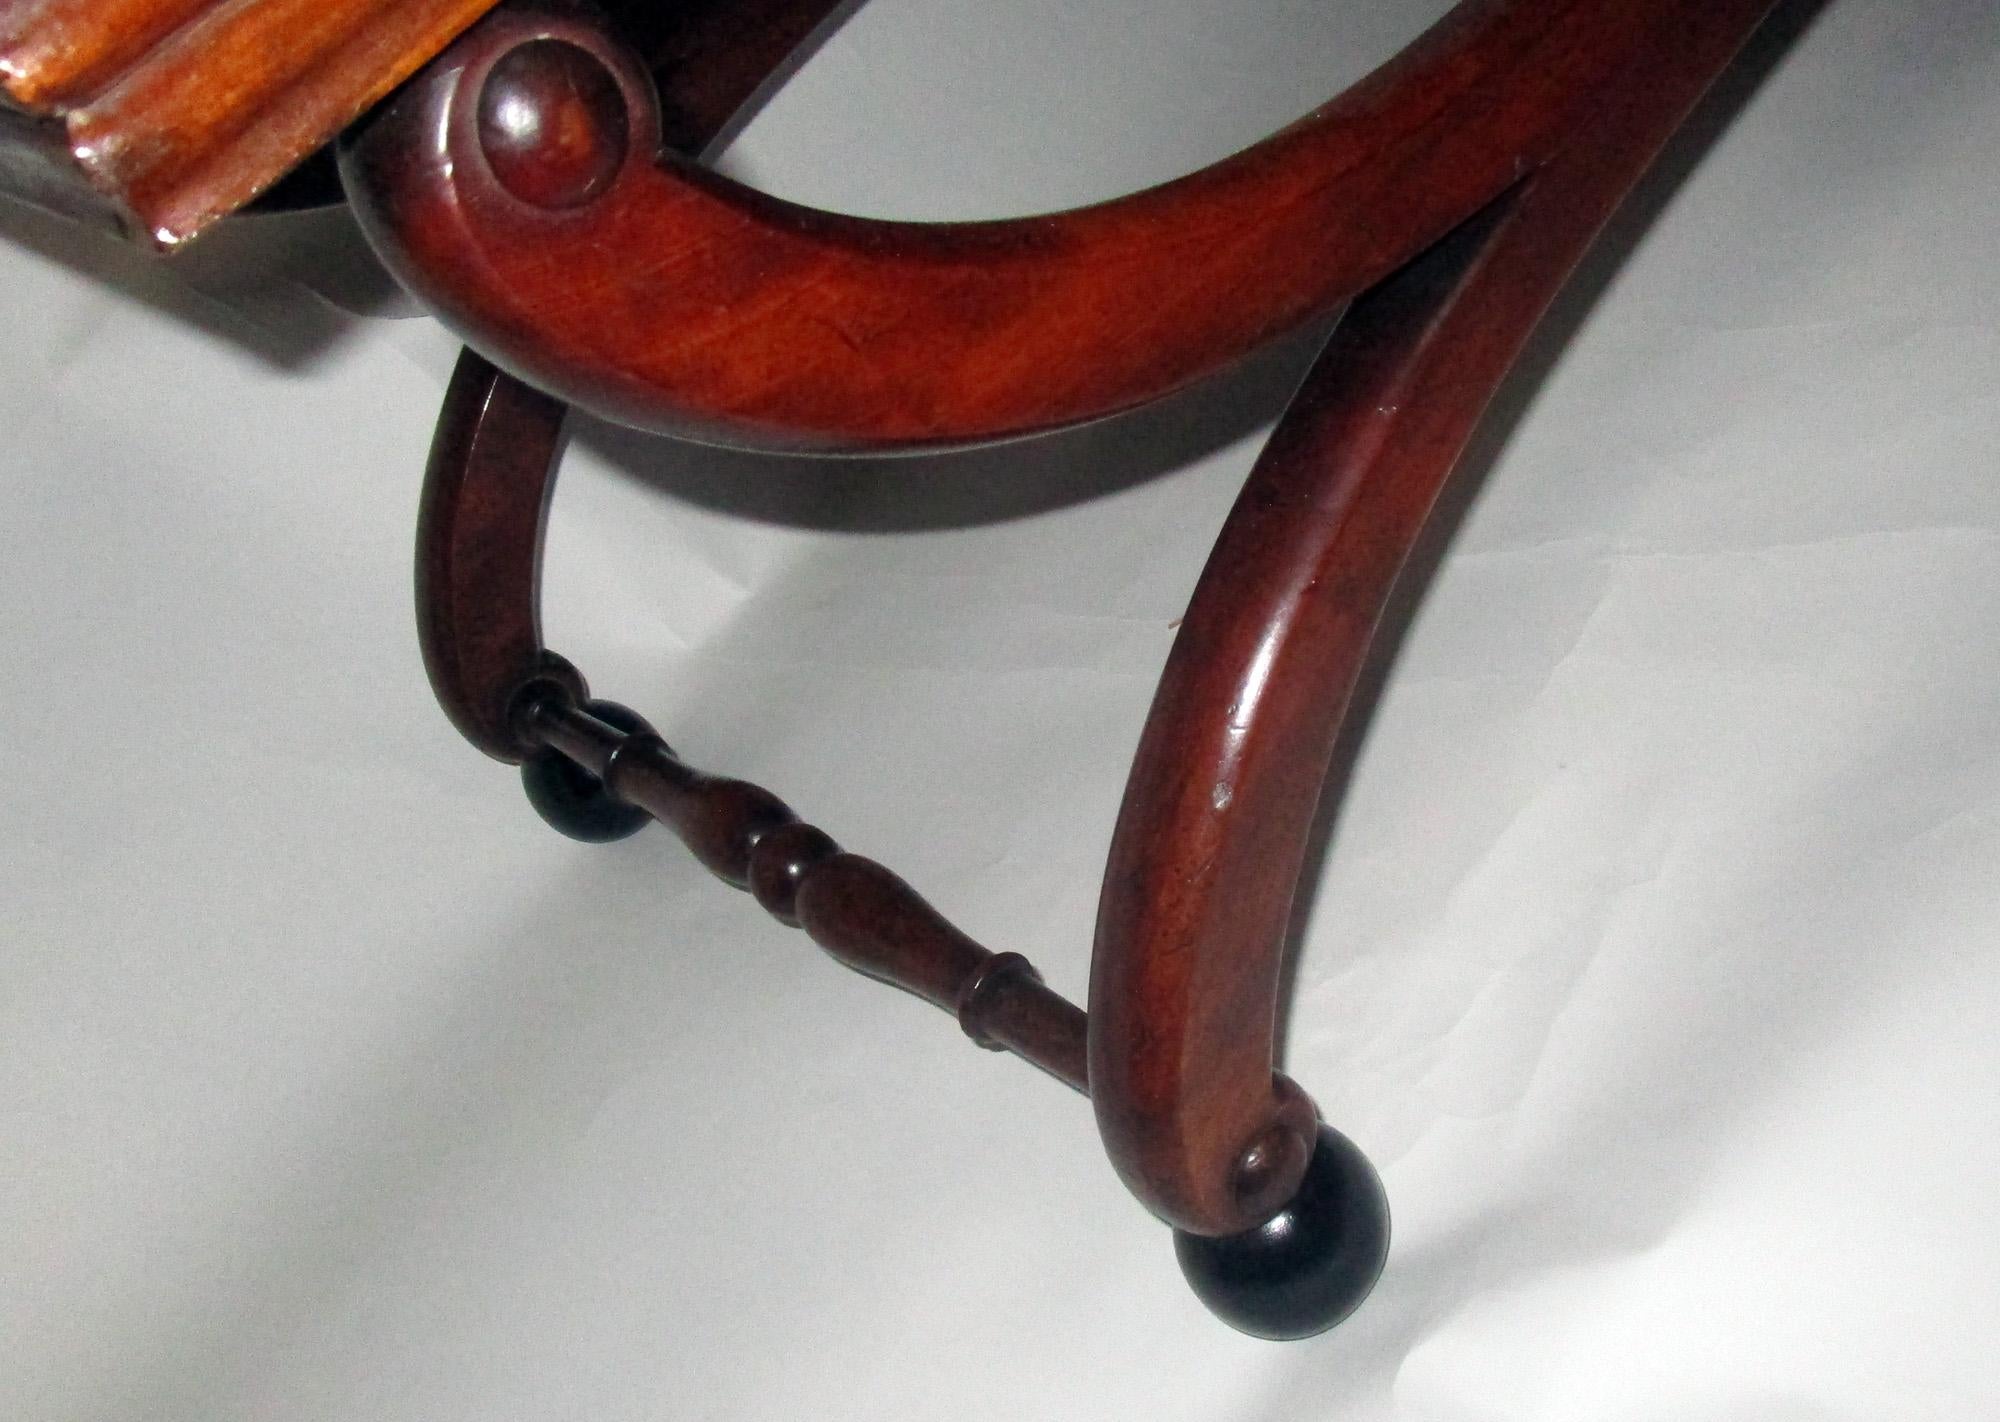 19th century English Regency period mahogany bench in graceful scroll form. Upholstered lift out seat. A very versatile piece suitable at the end of a bed, in front or in back of a sofa, in a hallway or used as a fireplace bench. Sturdy